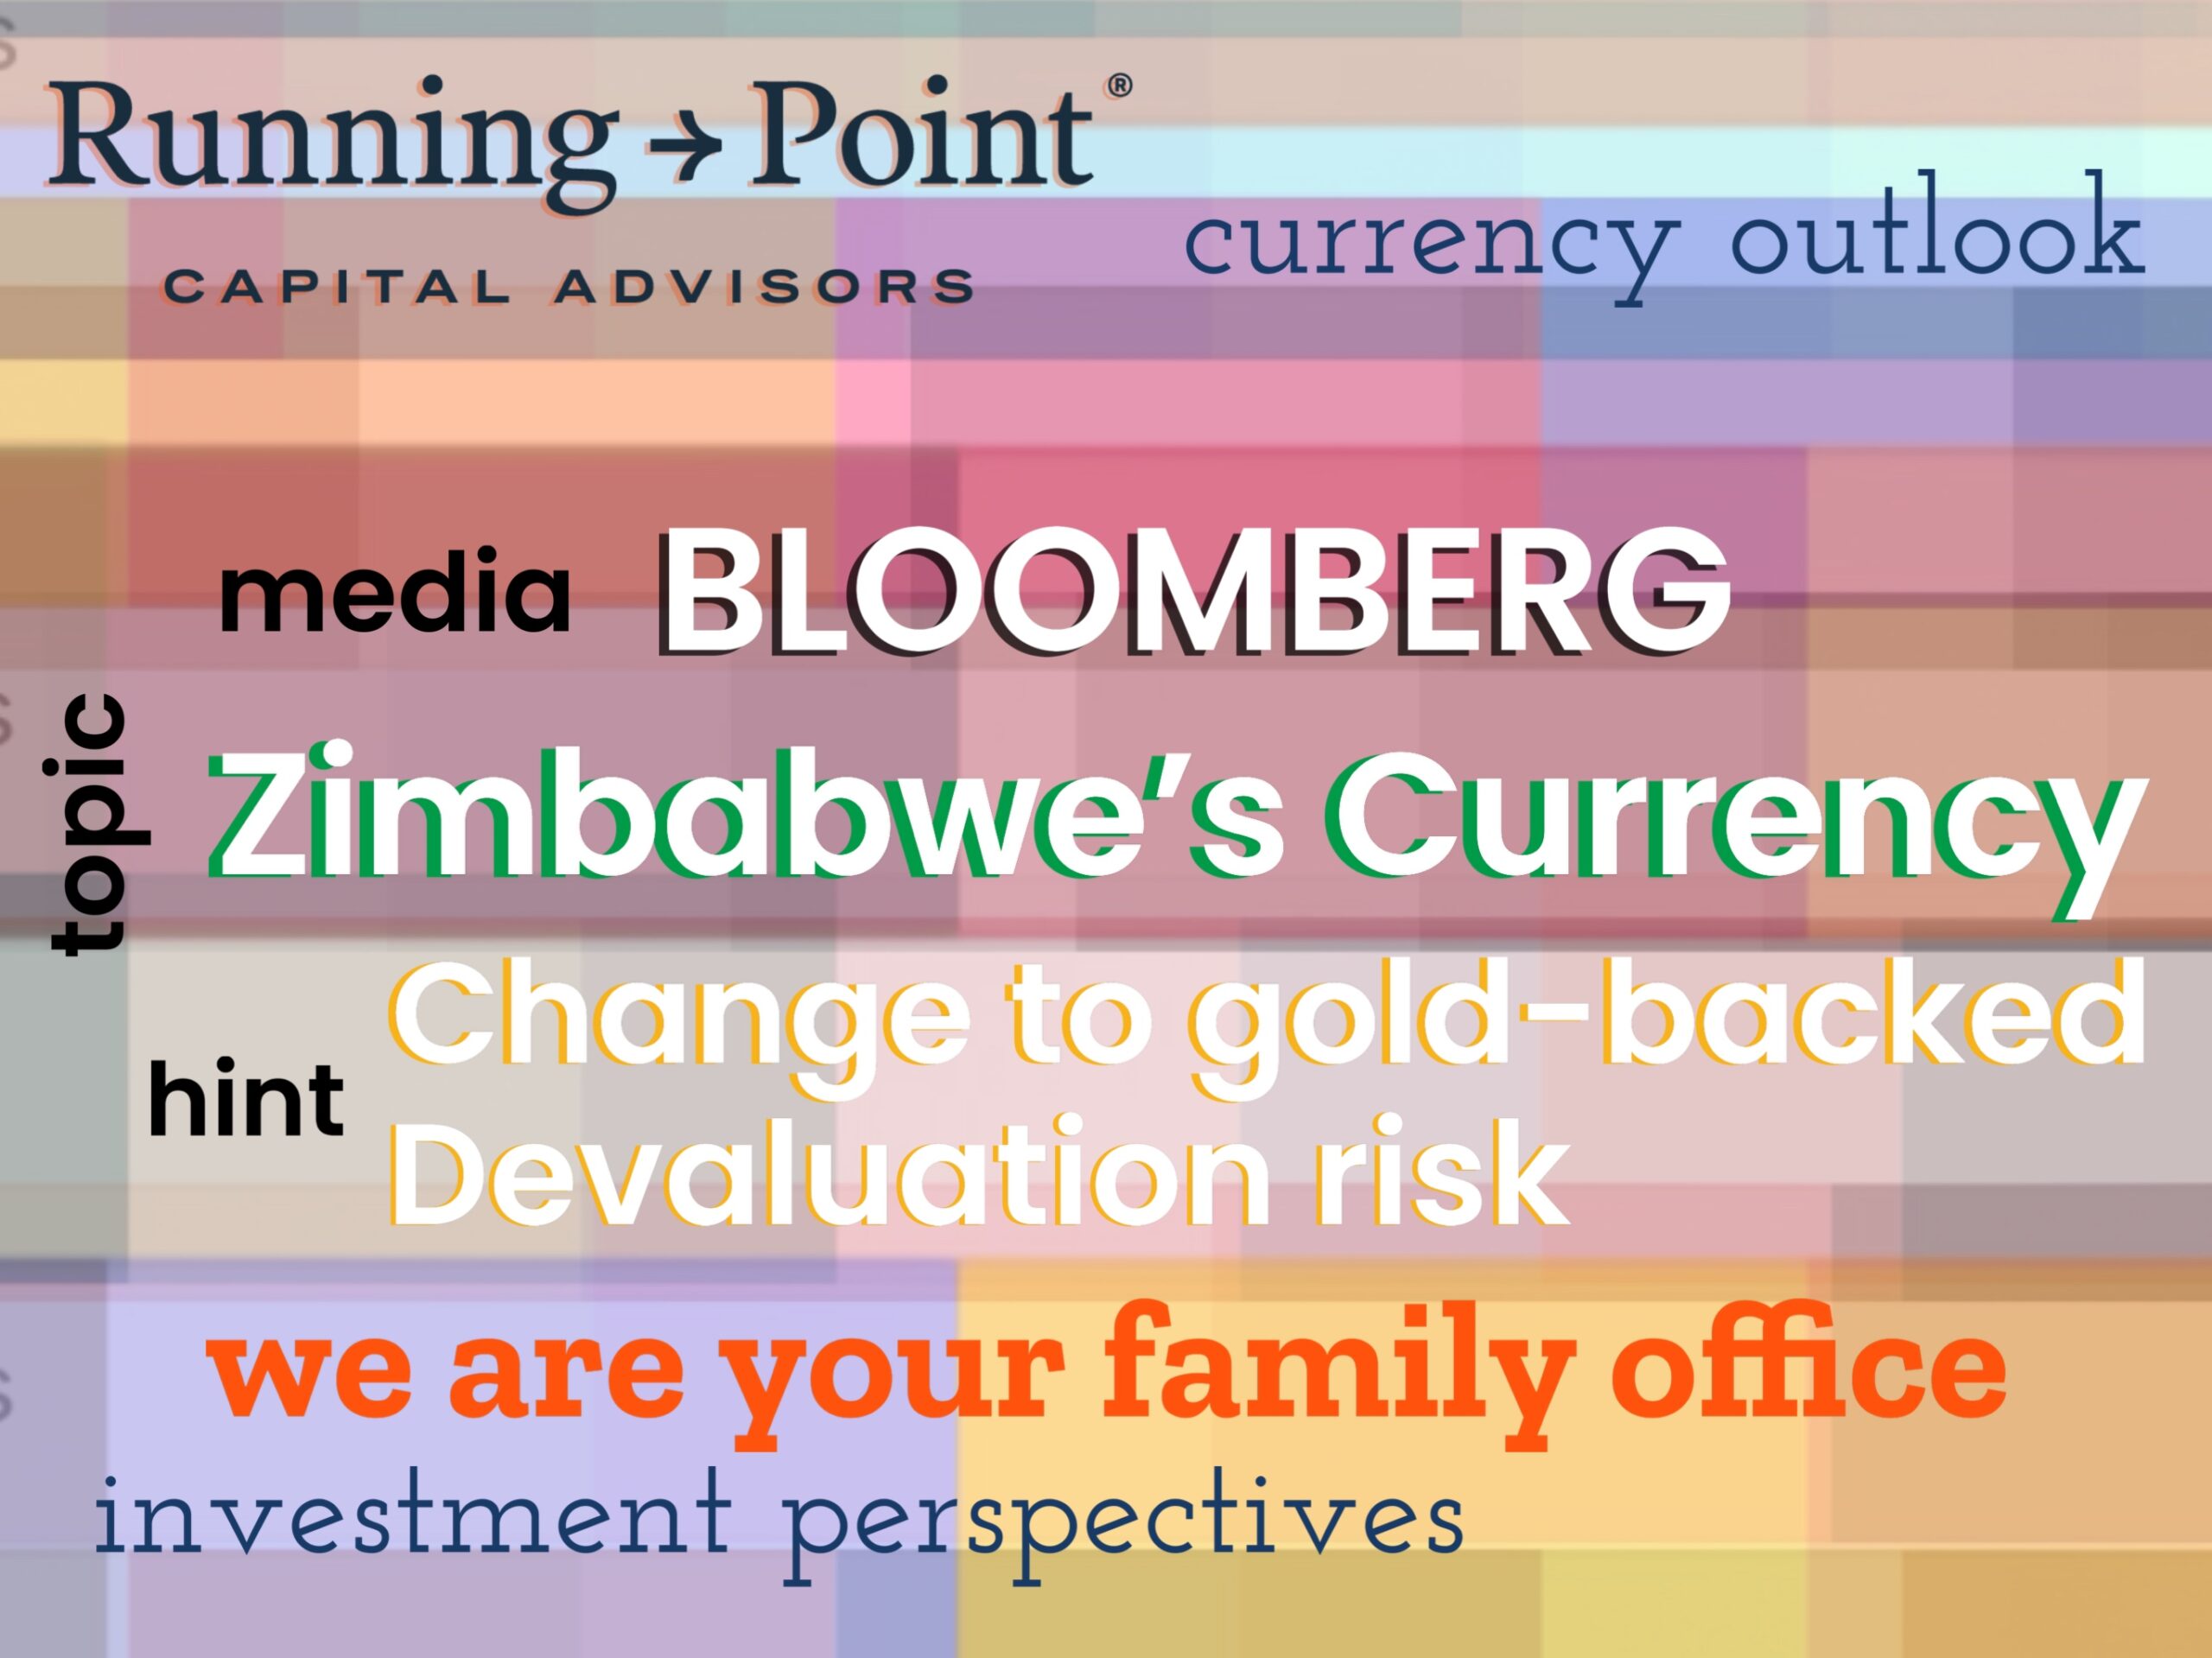 Zimbabwe Currency, backed by gold